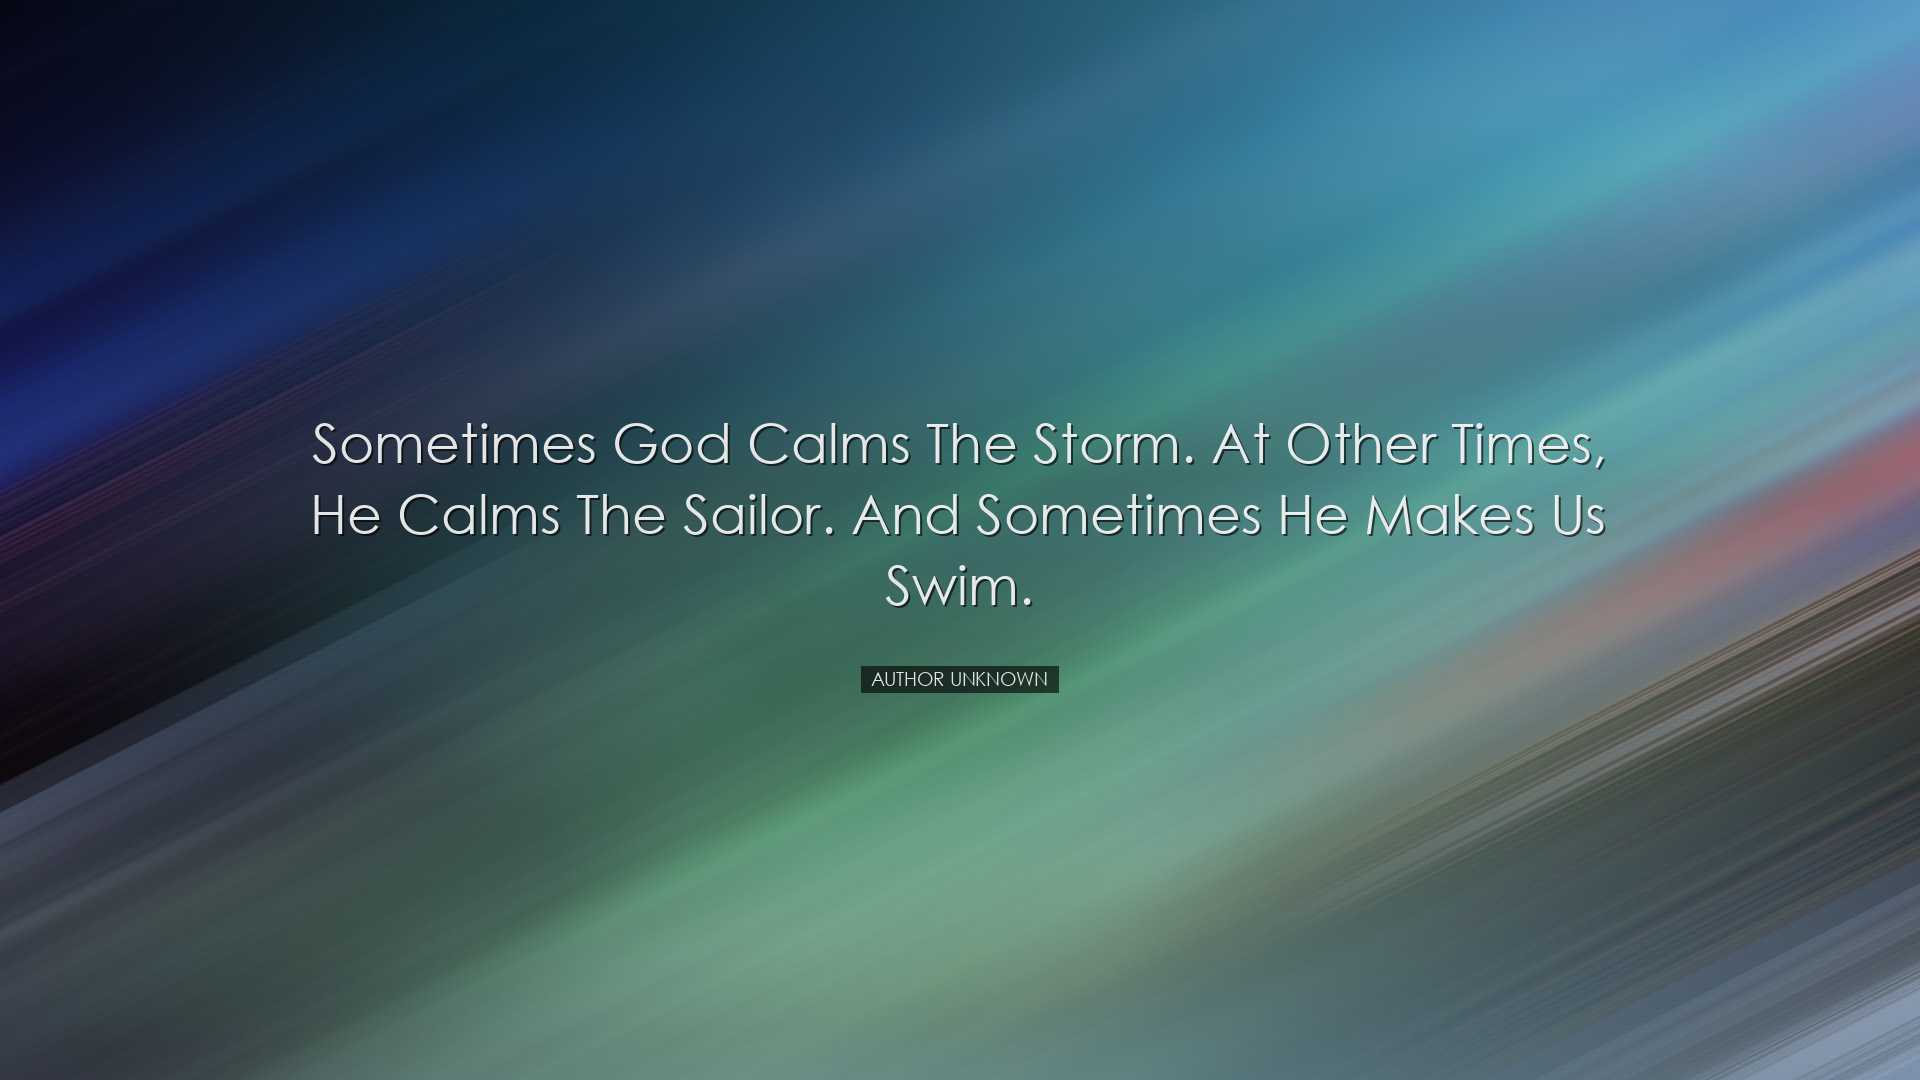 Sometimes God calms the storm. At other times, he calms the sailor